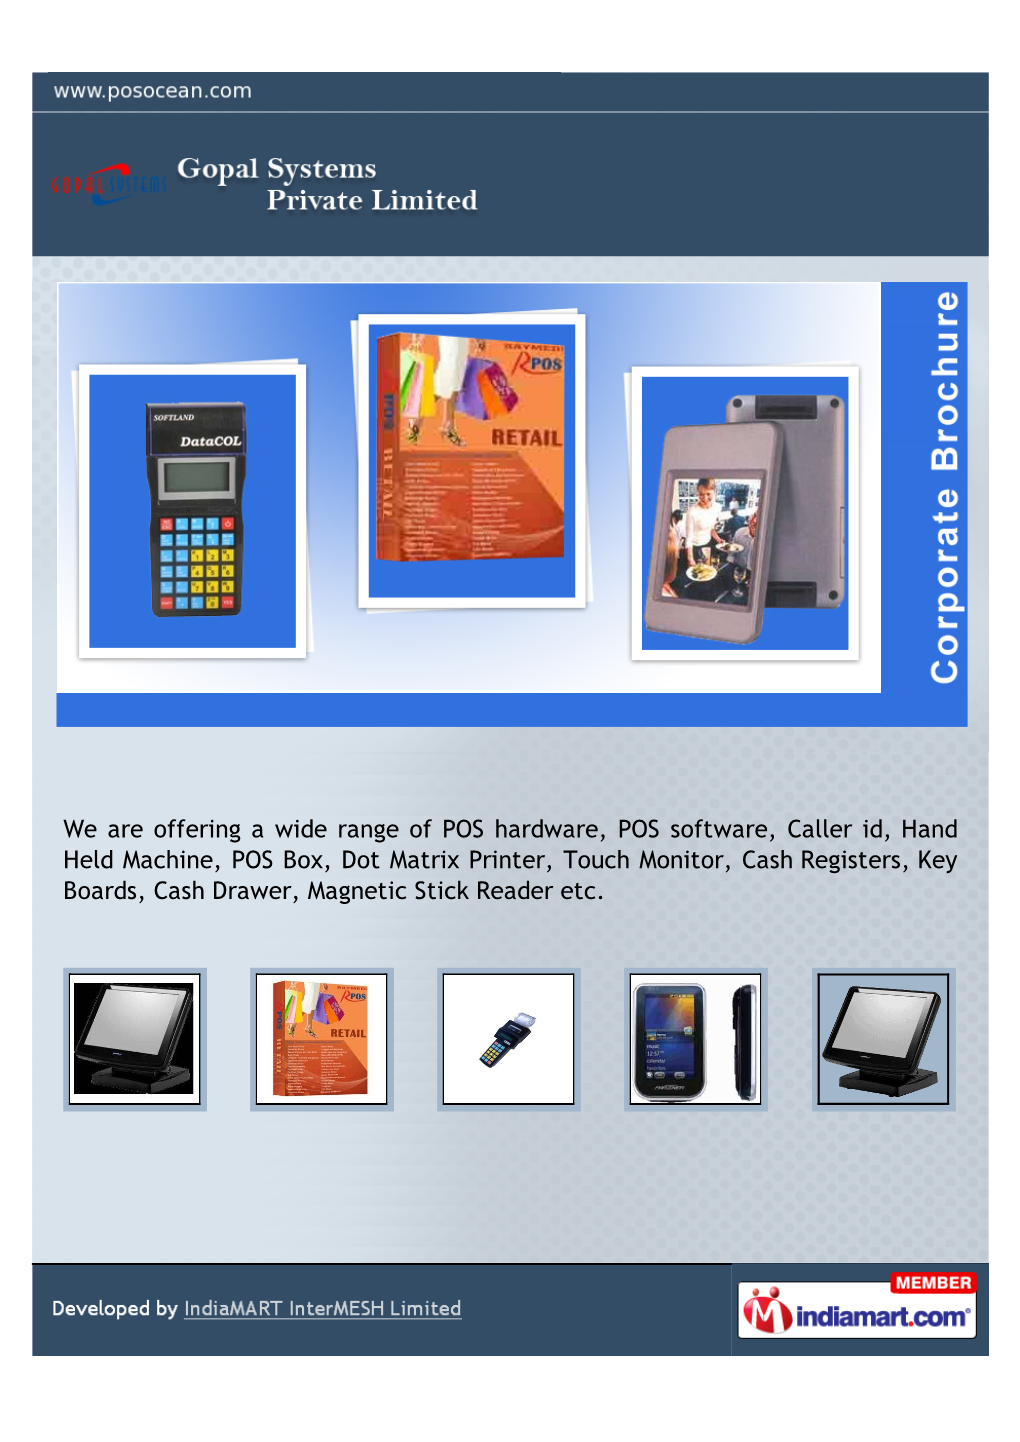 We Are Offering a Wide Range of POS Hardware, POS Software, Caller Id